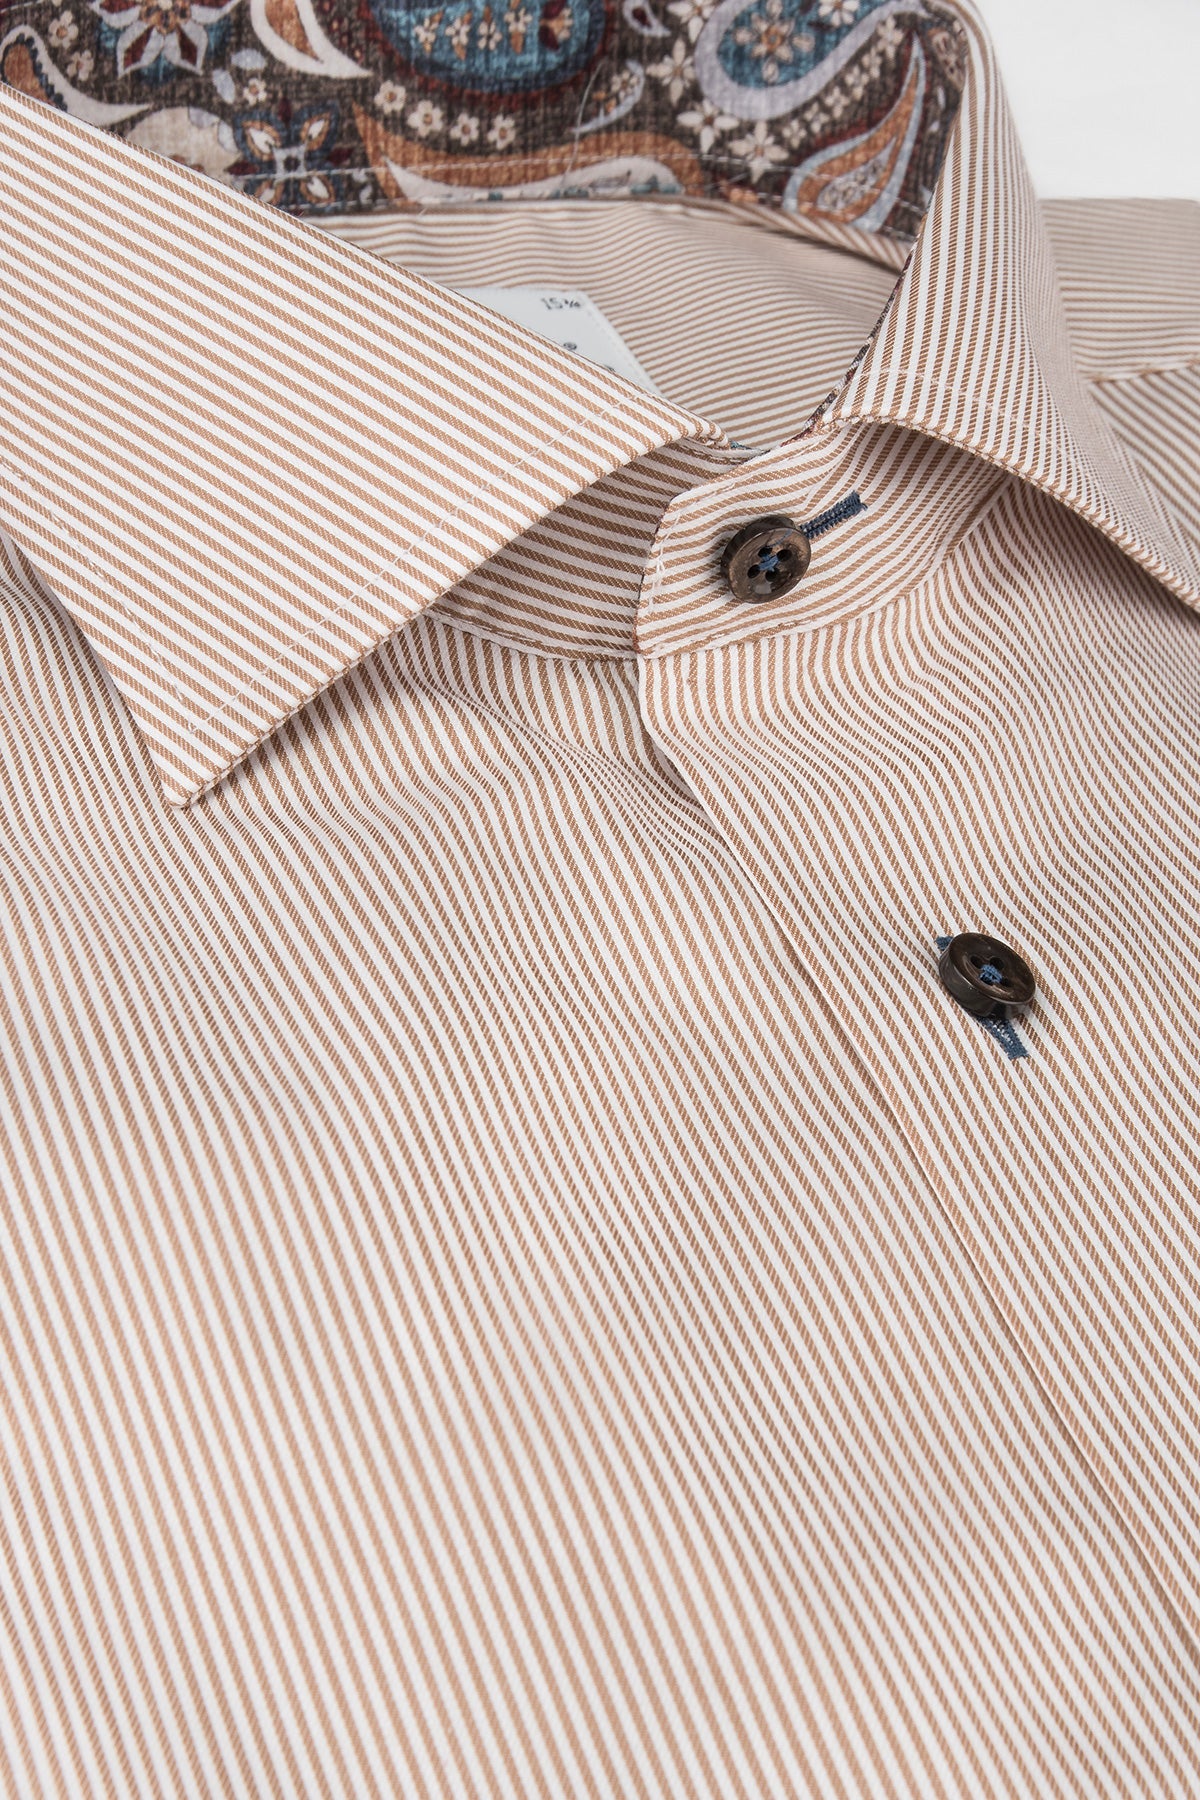 Brown striped regular fit shirt with contrast details